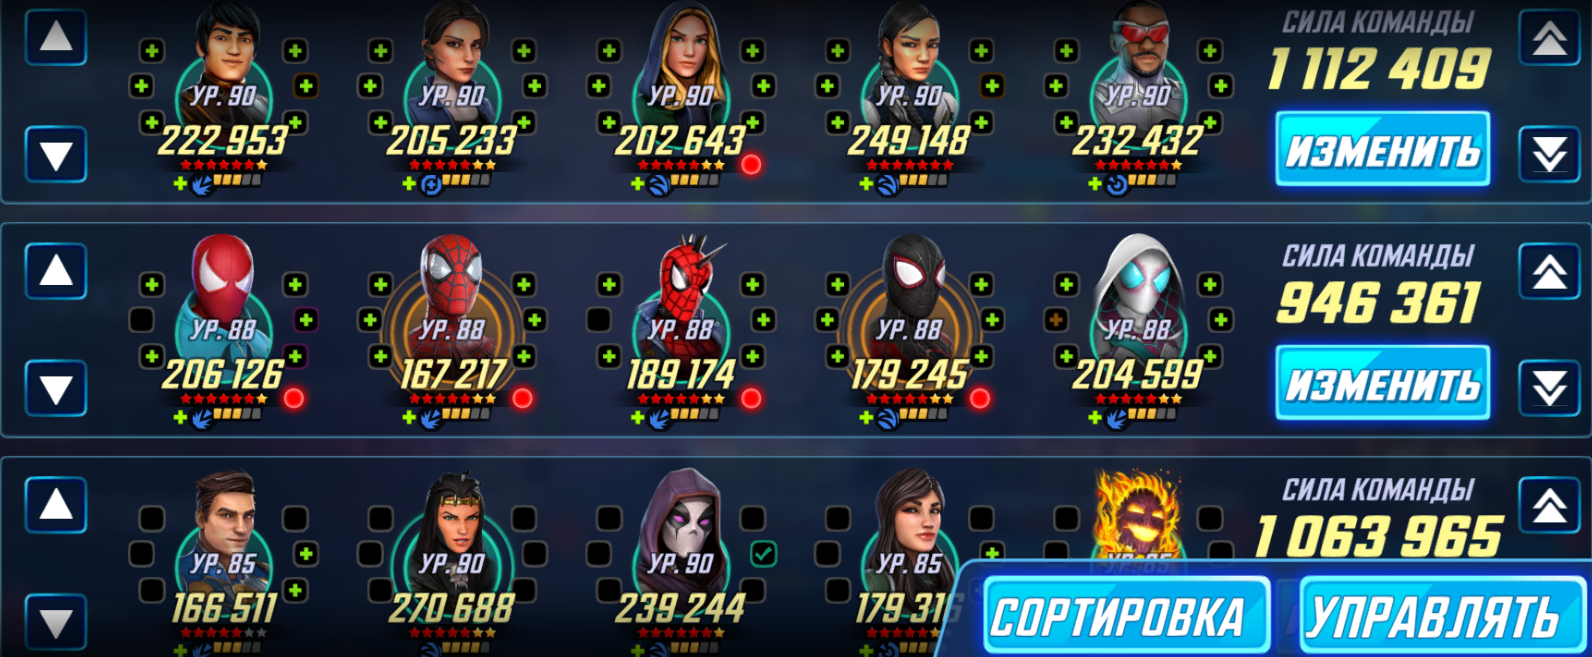 Death Seed Team Guide (Infographic) : r/MarvelStrikeForce